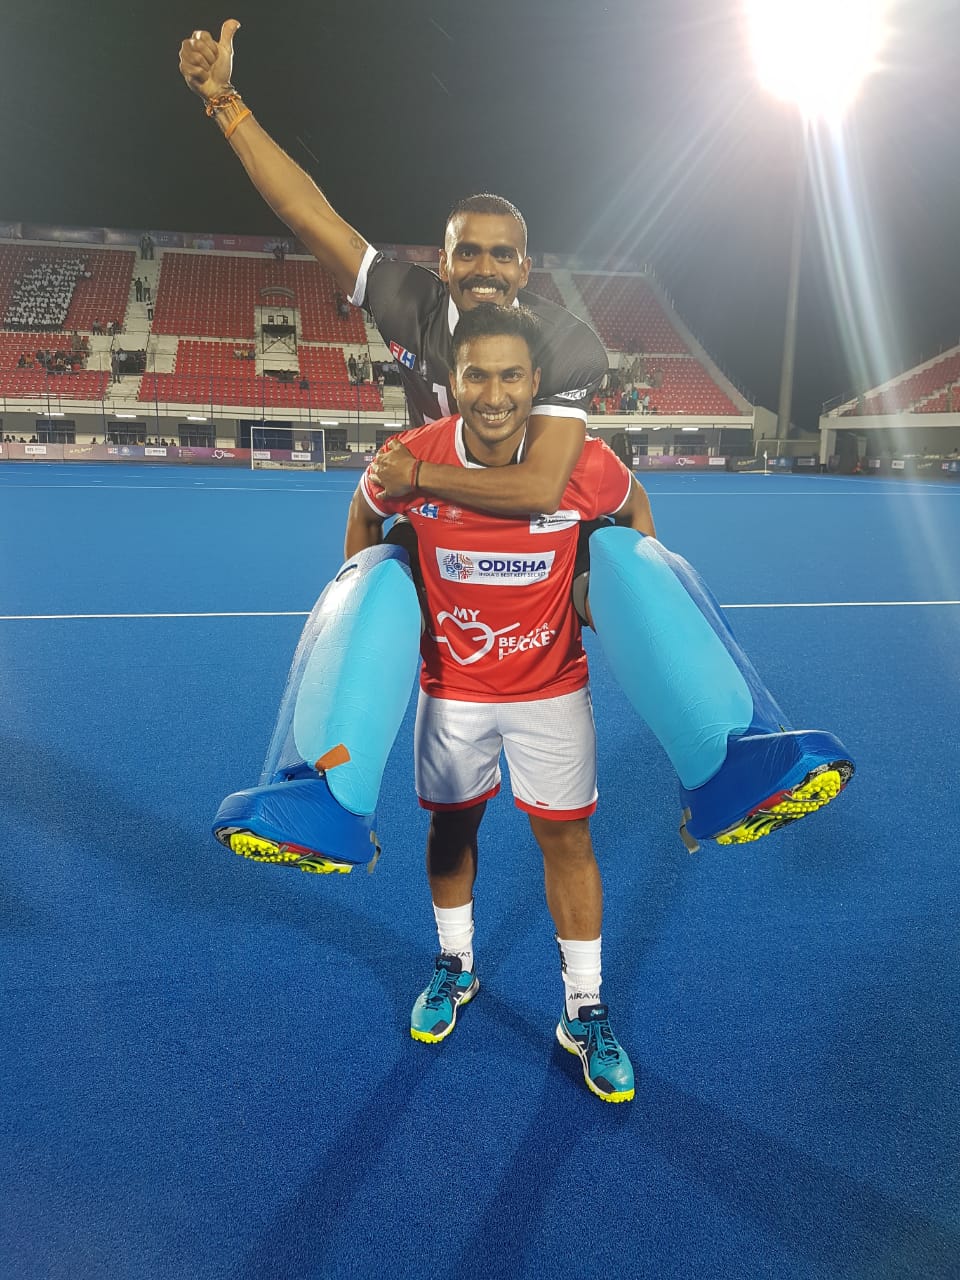 VR Raghunath with P. R. Sreejesh during the exhibition match in 2018 ahead of the FIH Men's World Cup in Bhubaneswar.